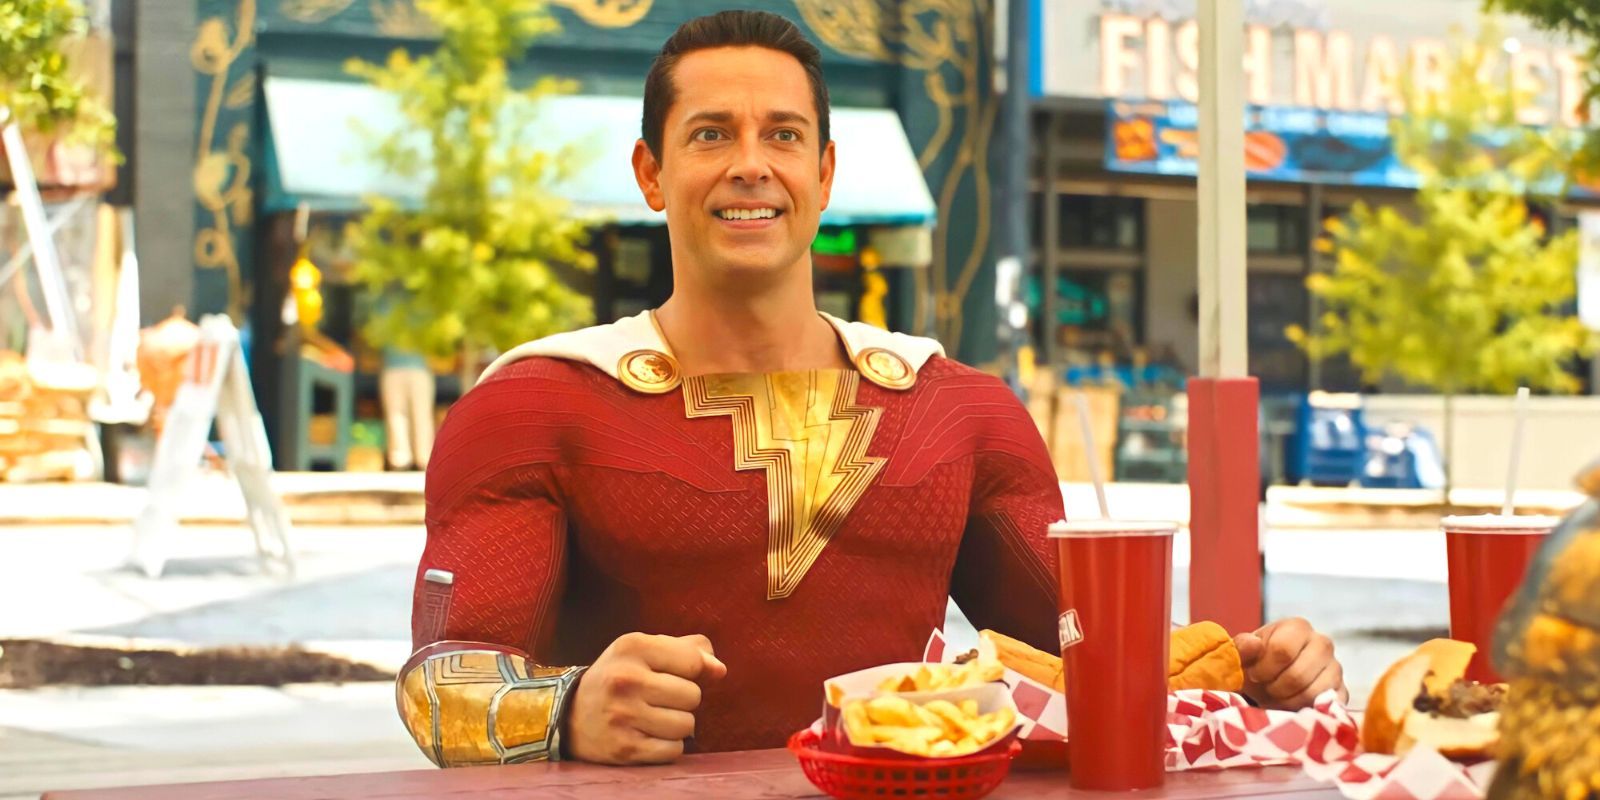 Shazam sitting at the table of a fast food restaurant looking excited